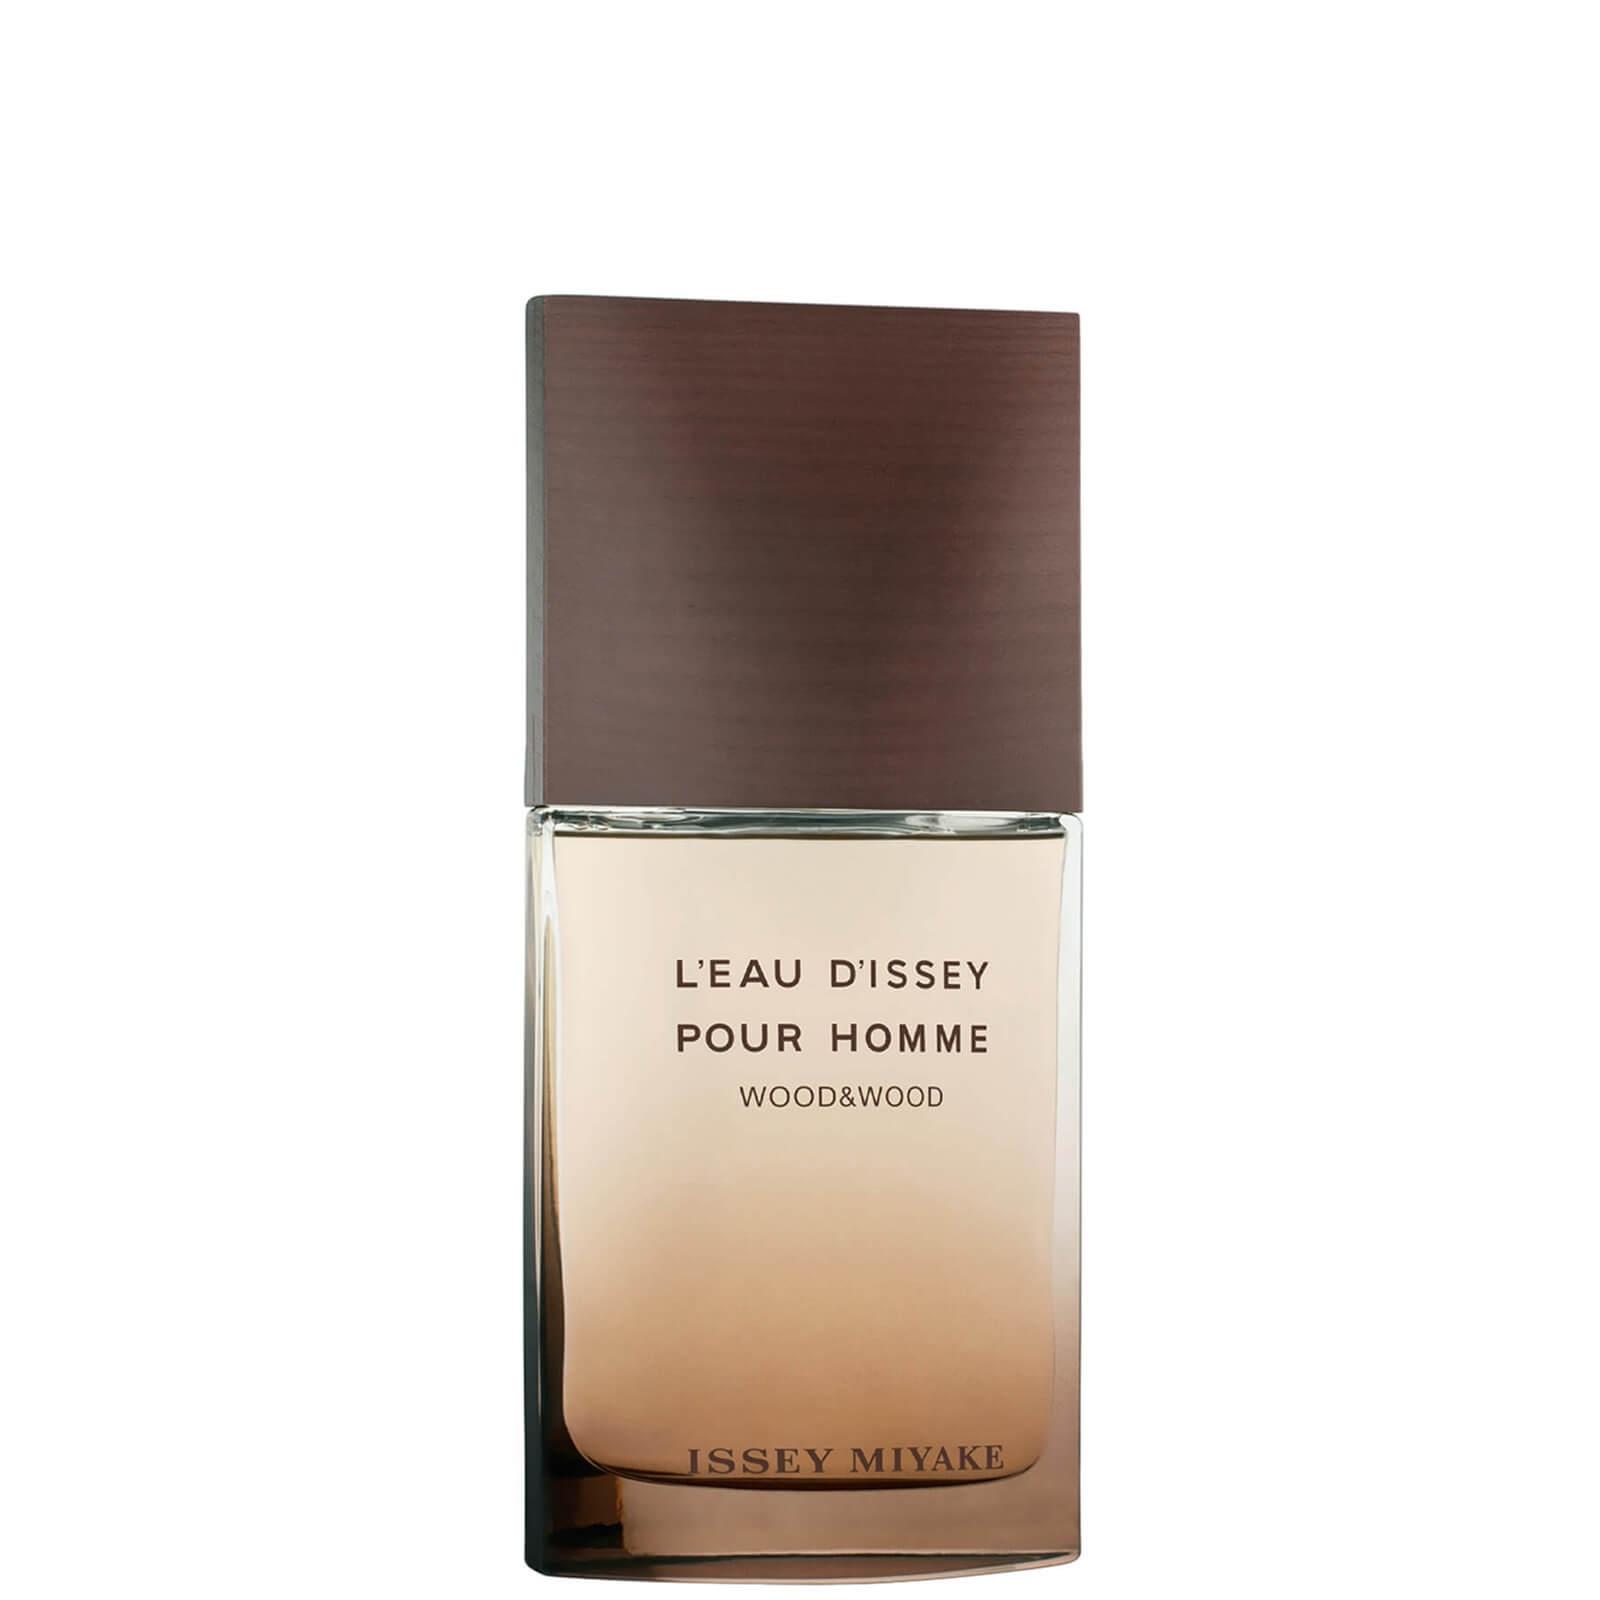 Issey Miyake - L'eau D'issey Pour Homme Wood & Wood Profumi Uomo 50 Ml Male